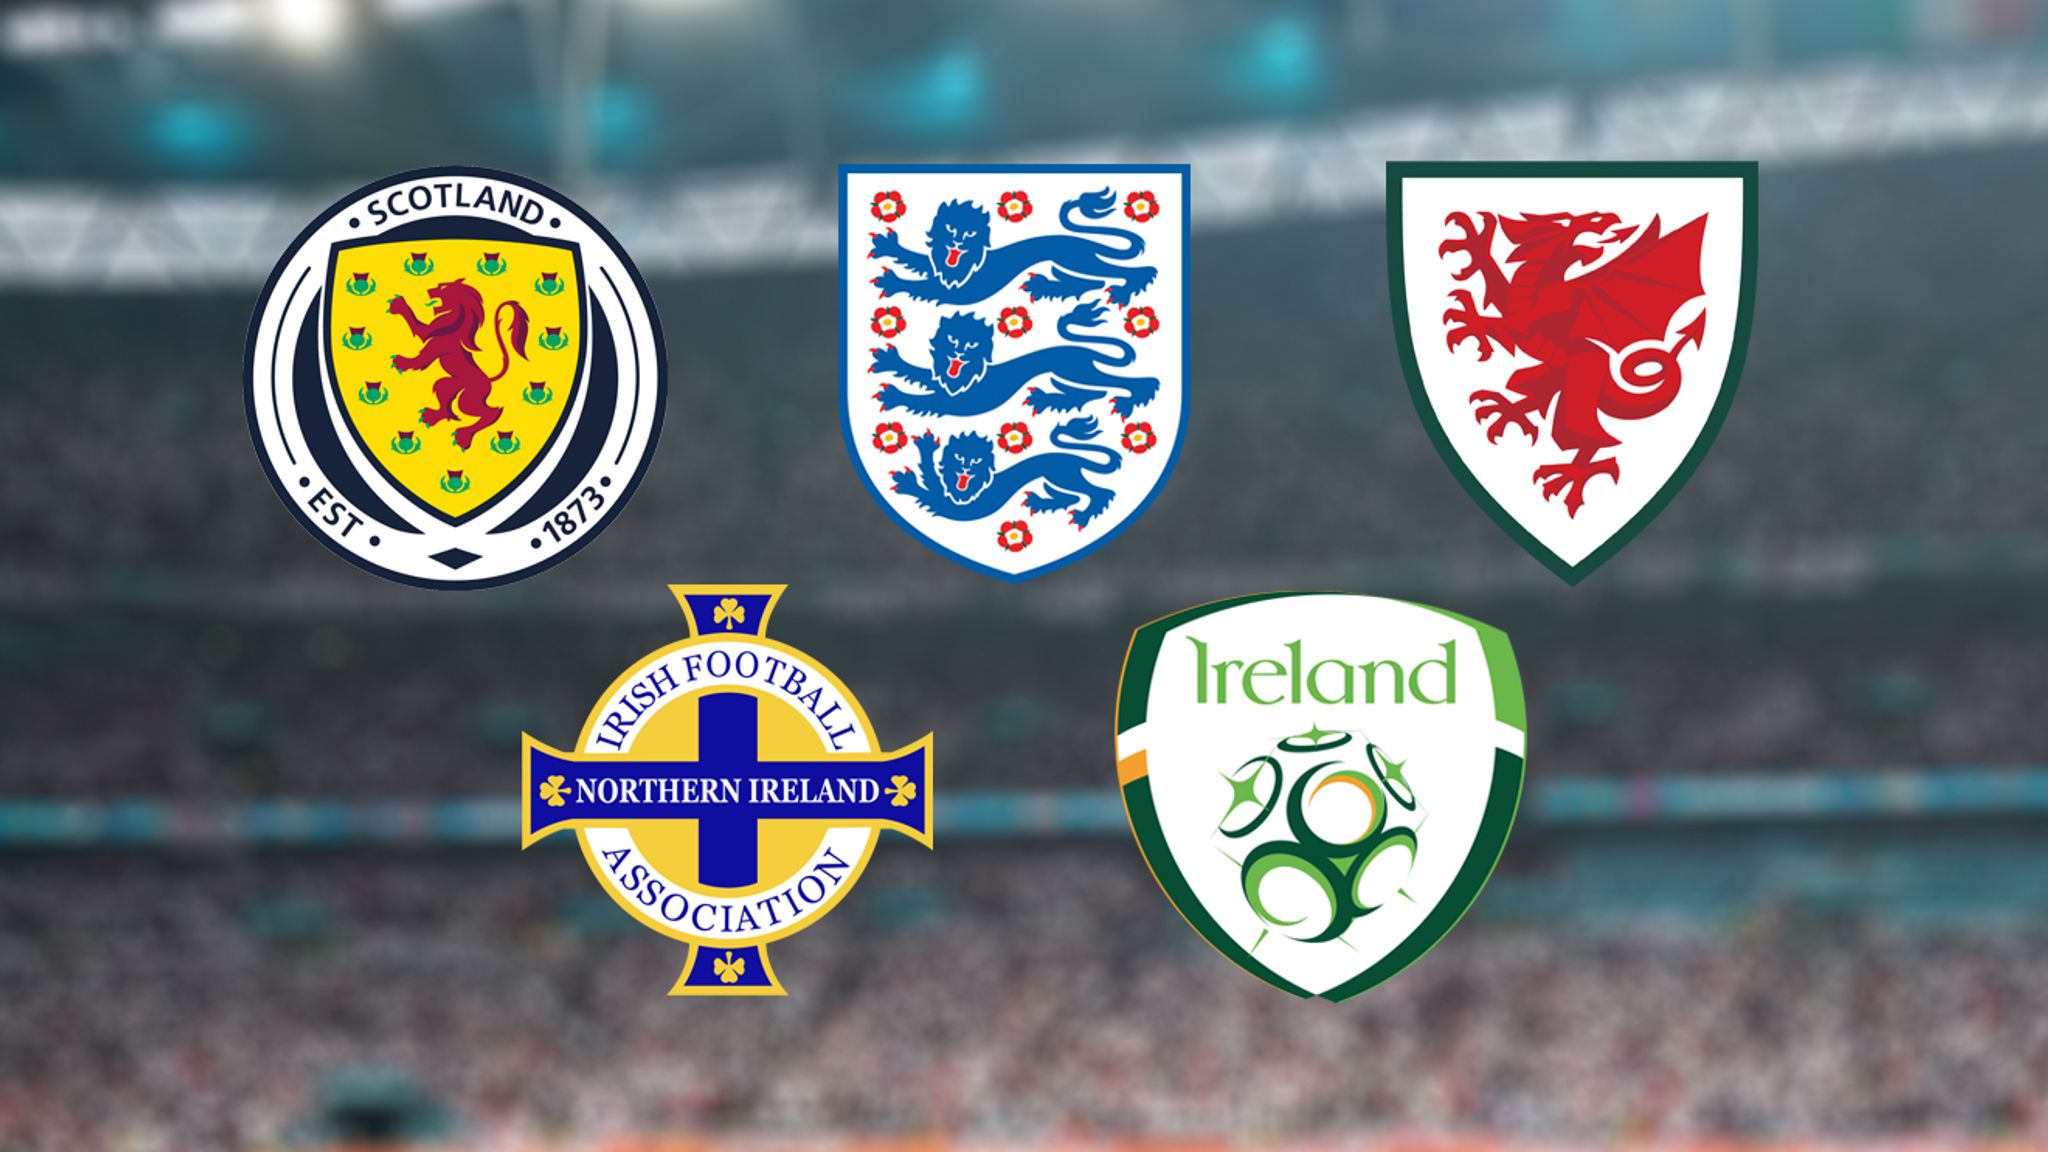 Euro 2028 UK and Ireland announce joint bid to host tournament and